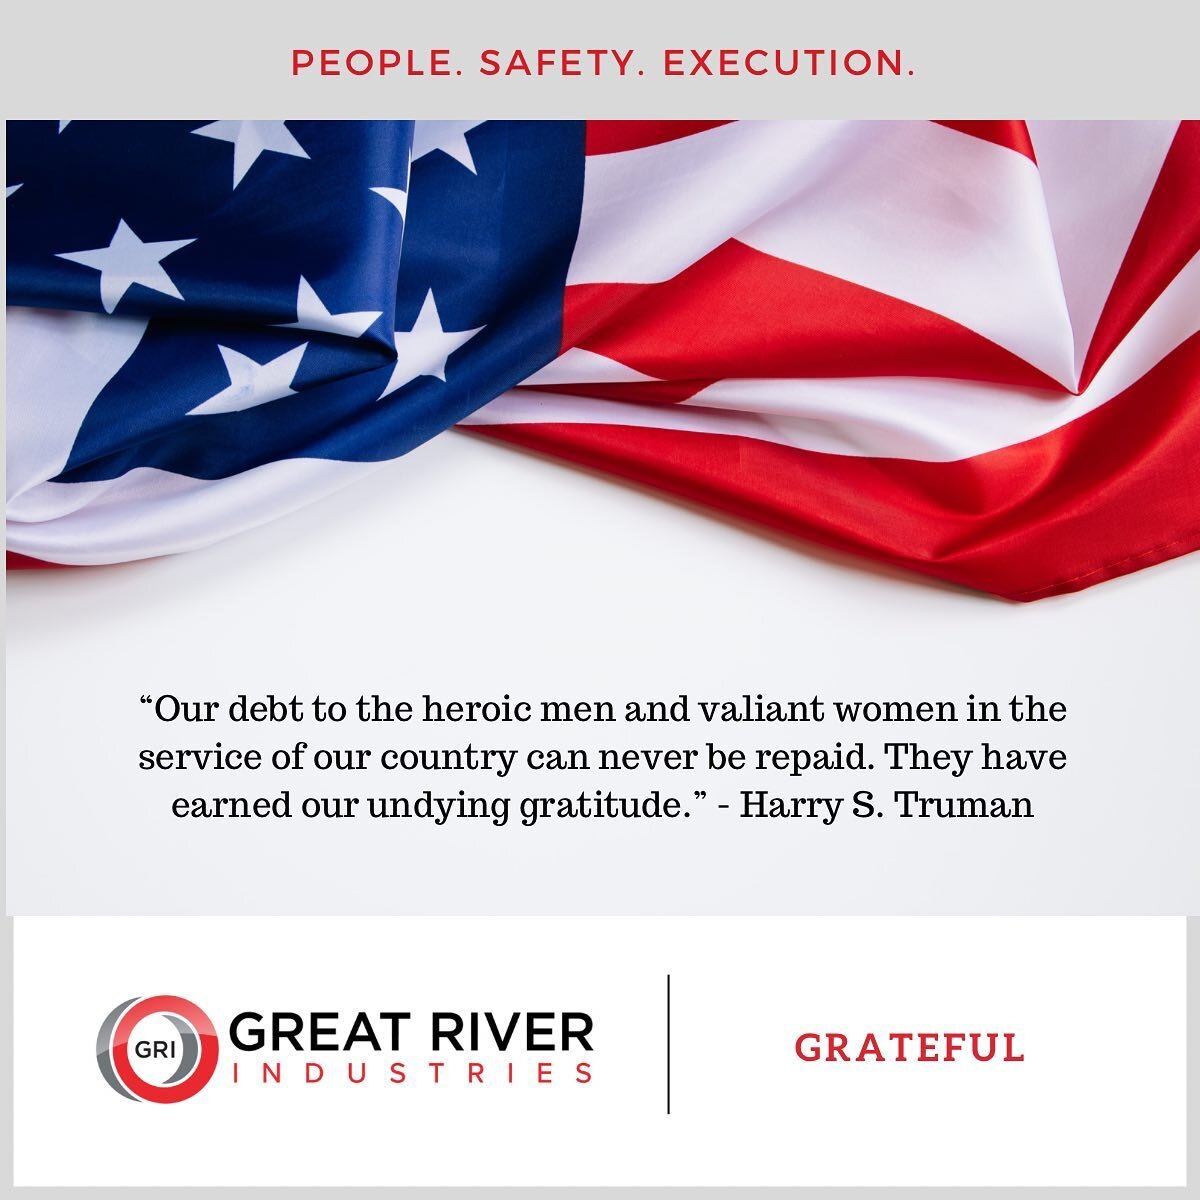 Thank you to all the great and brave soldiers who helped build this great nation! You are the reason behind our greatness today! Have a great Veteran&rsquo;s Day!

#gri360 #grateful #veterans
www.greatriver360.com